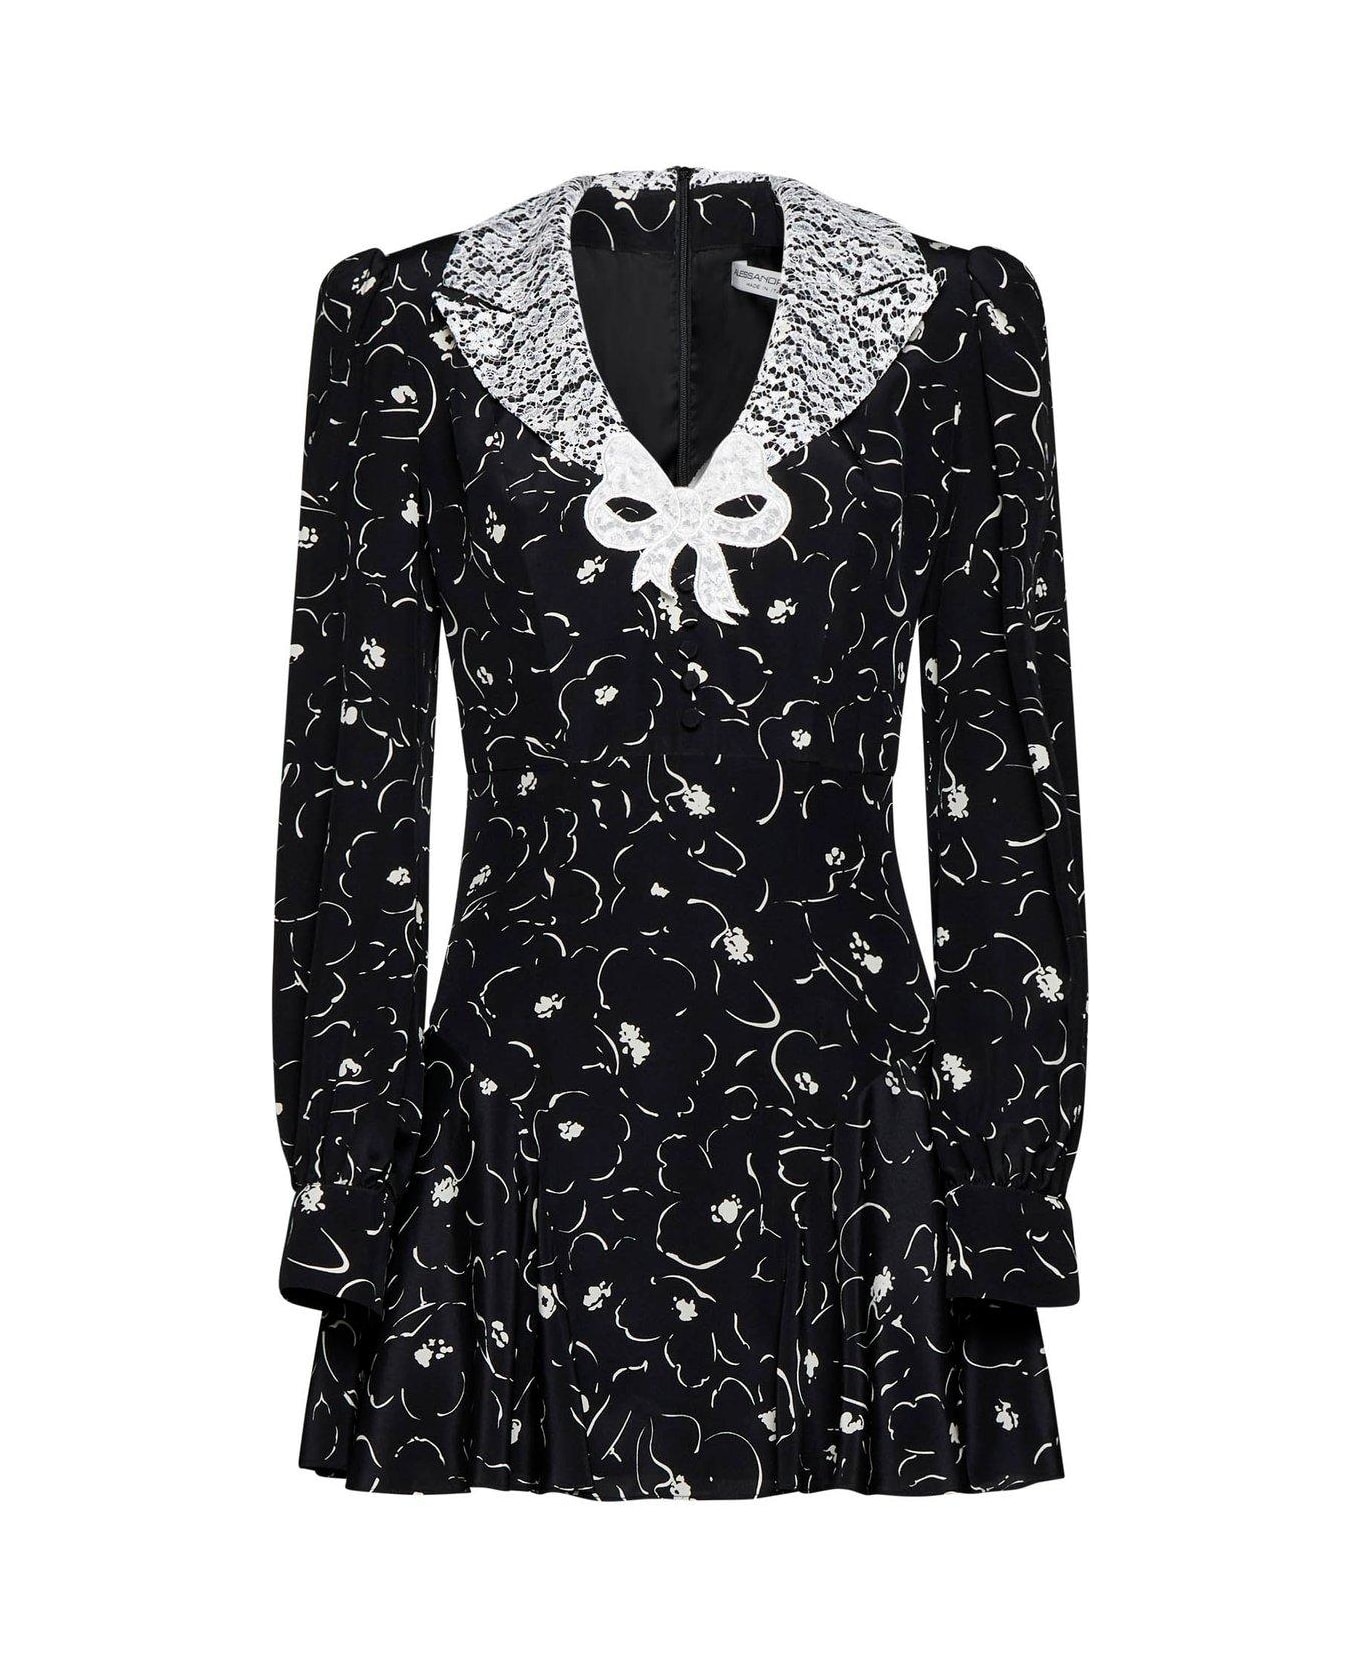 Alessandra Rich Bow Embellished Floral Printed Mini Dress - Black ブラウス